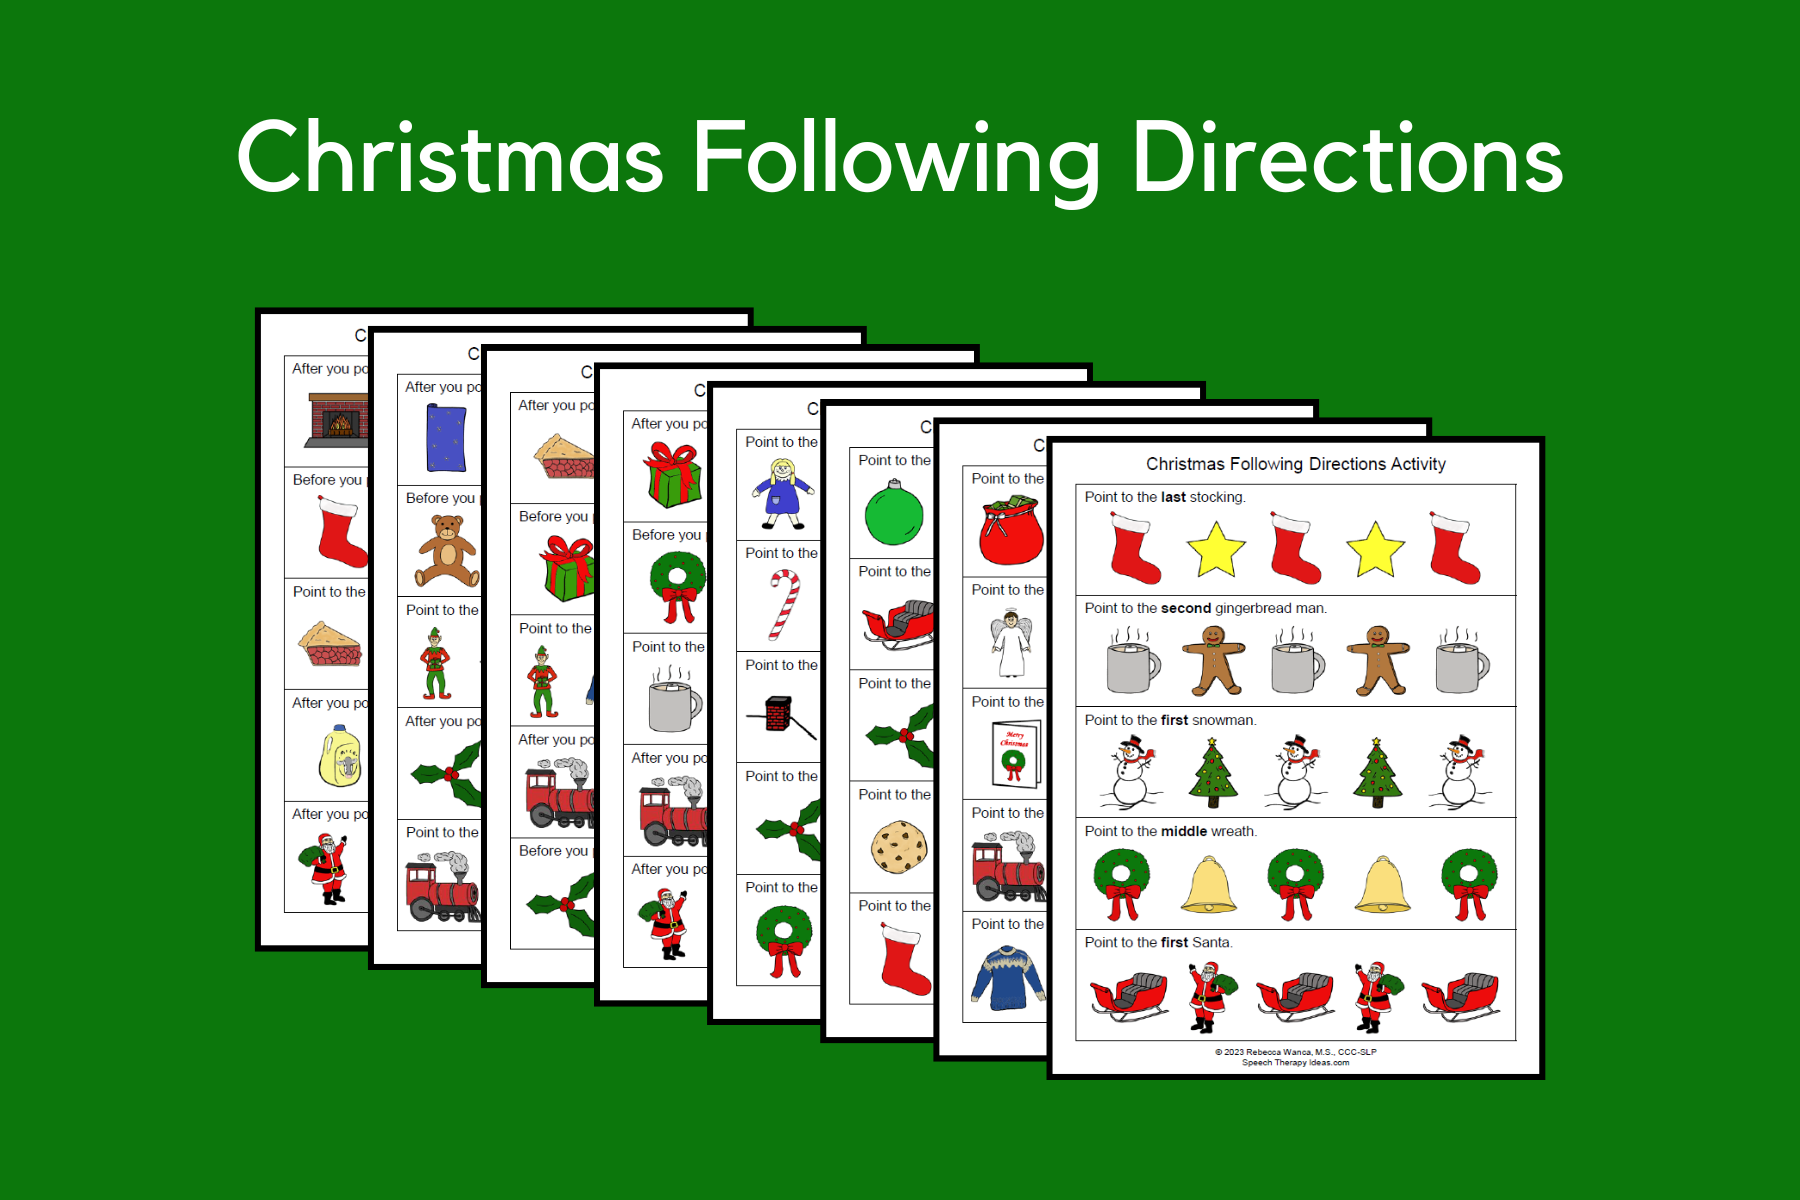 Christmas Following Directions Activity